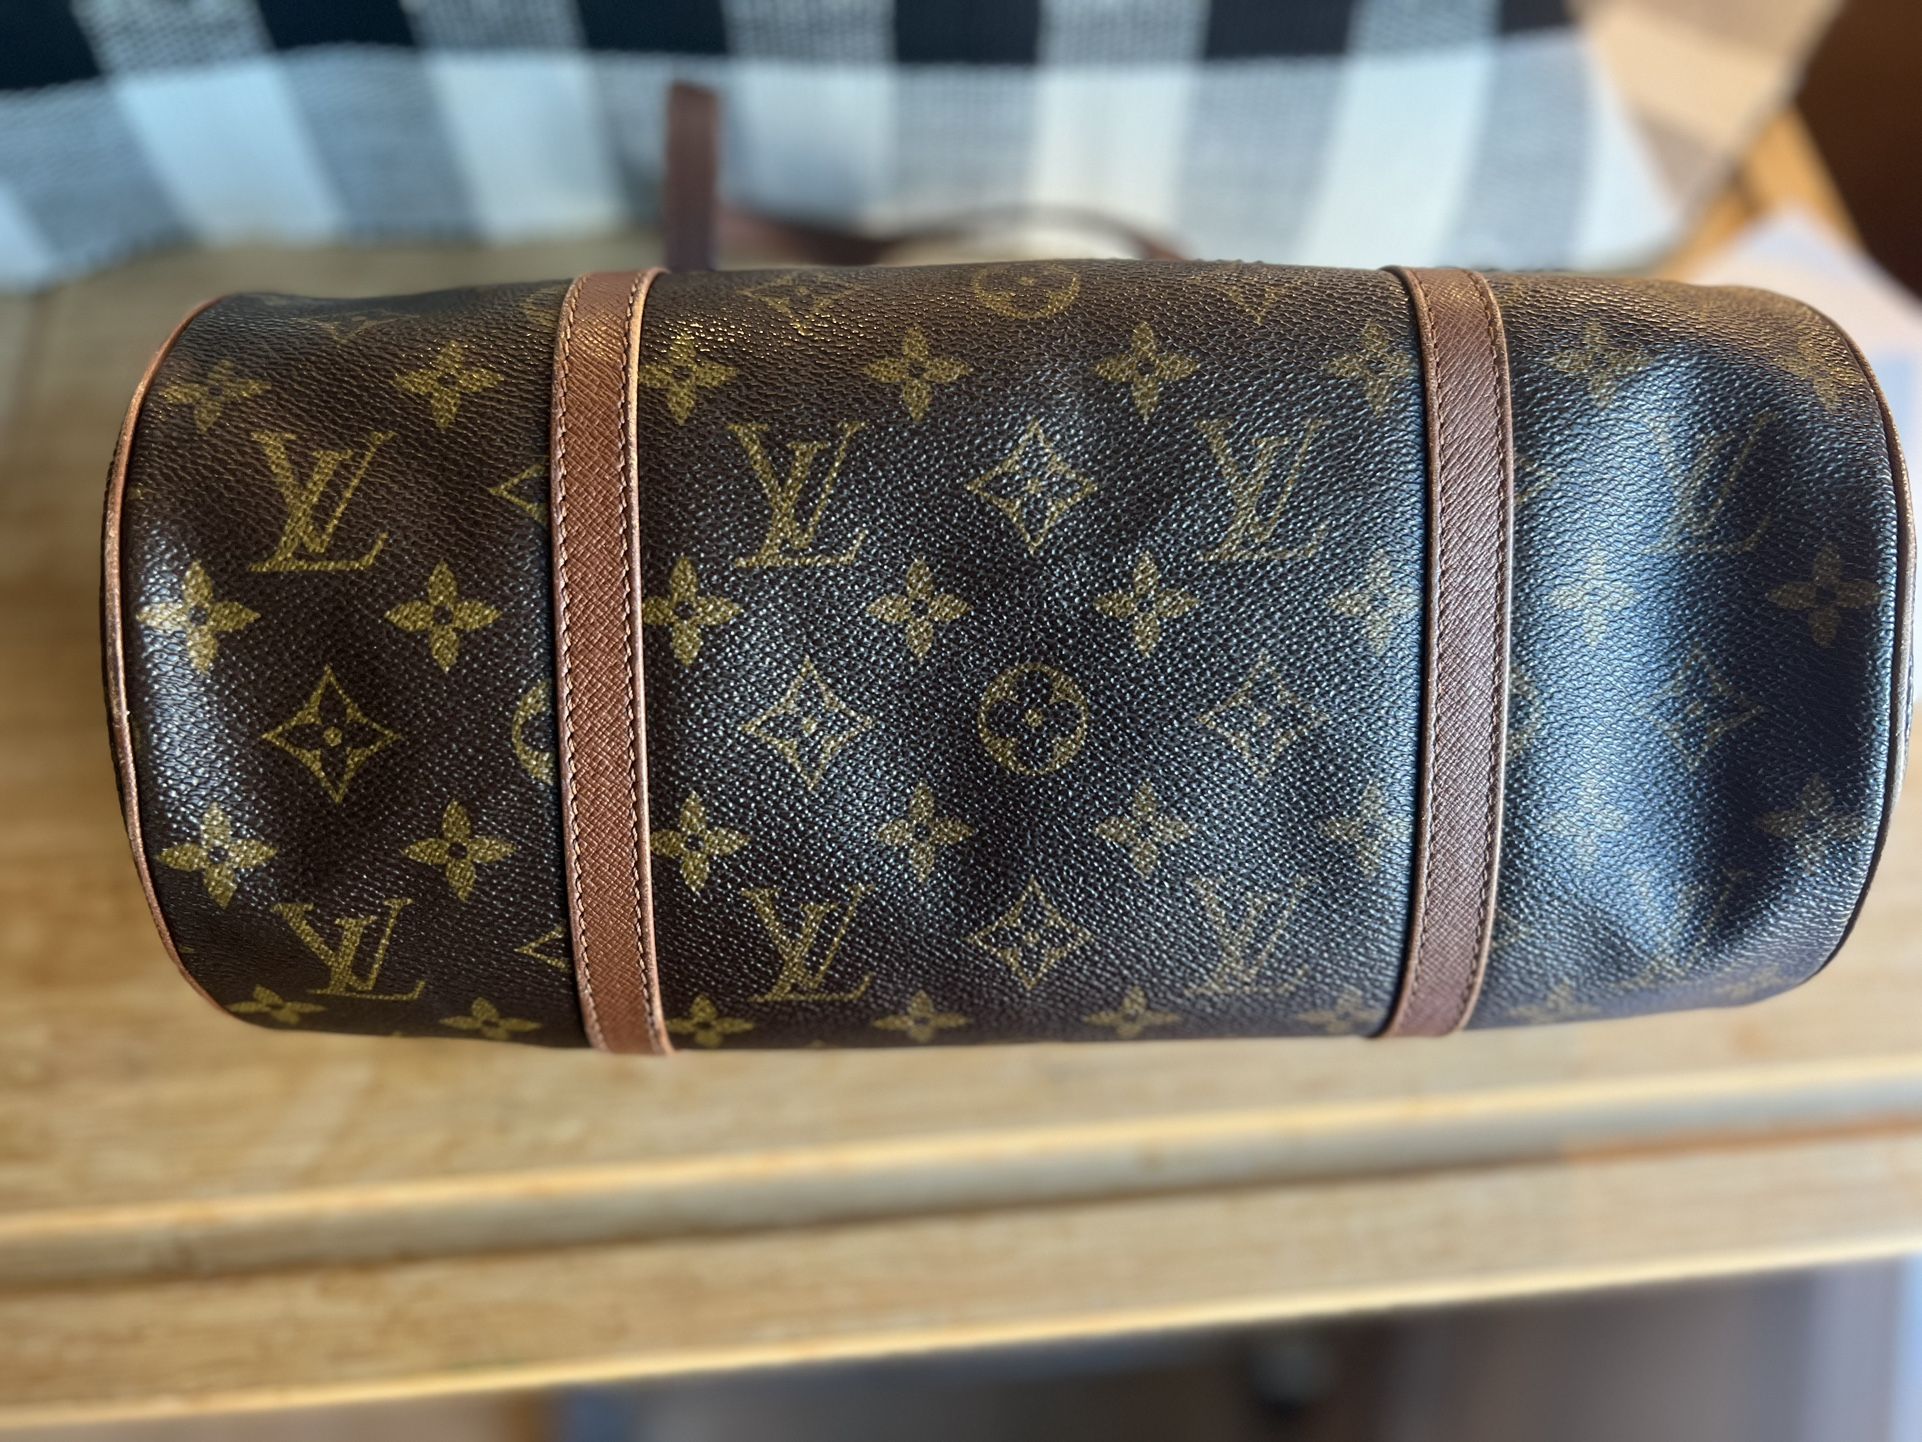 Louis Vuitton Papillon Trunk Bags for Sale in Clayton, NC - OfferUp